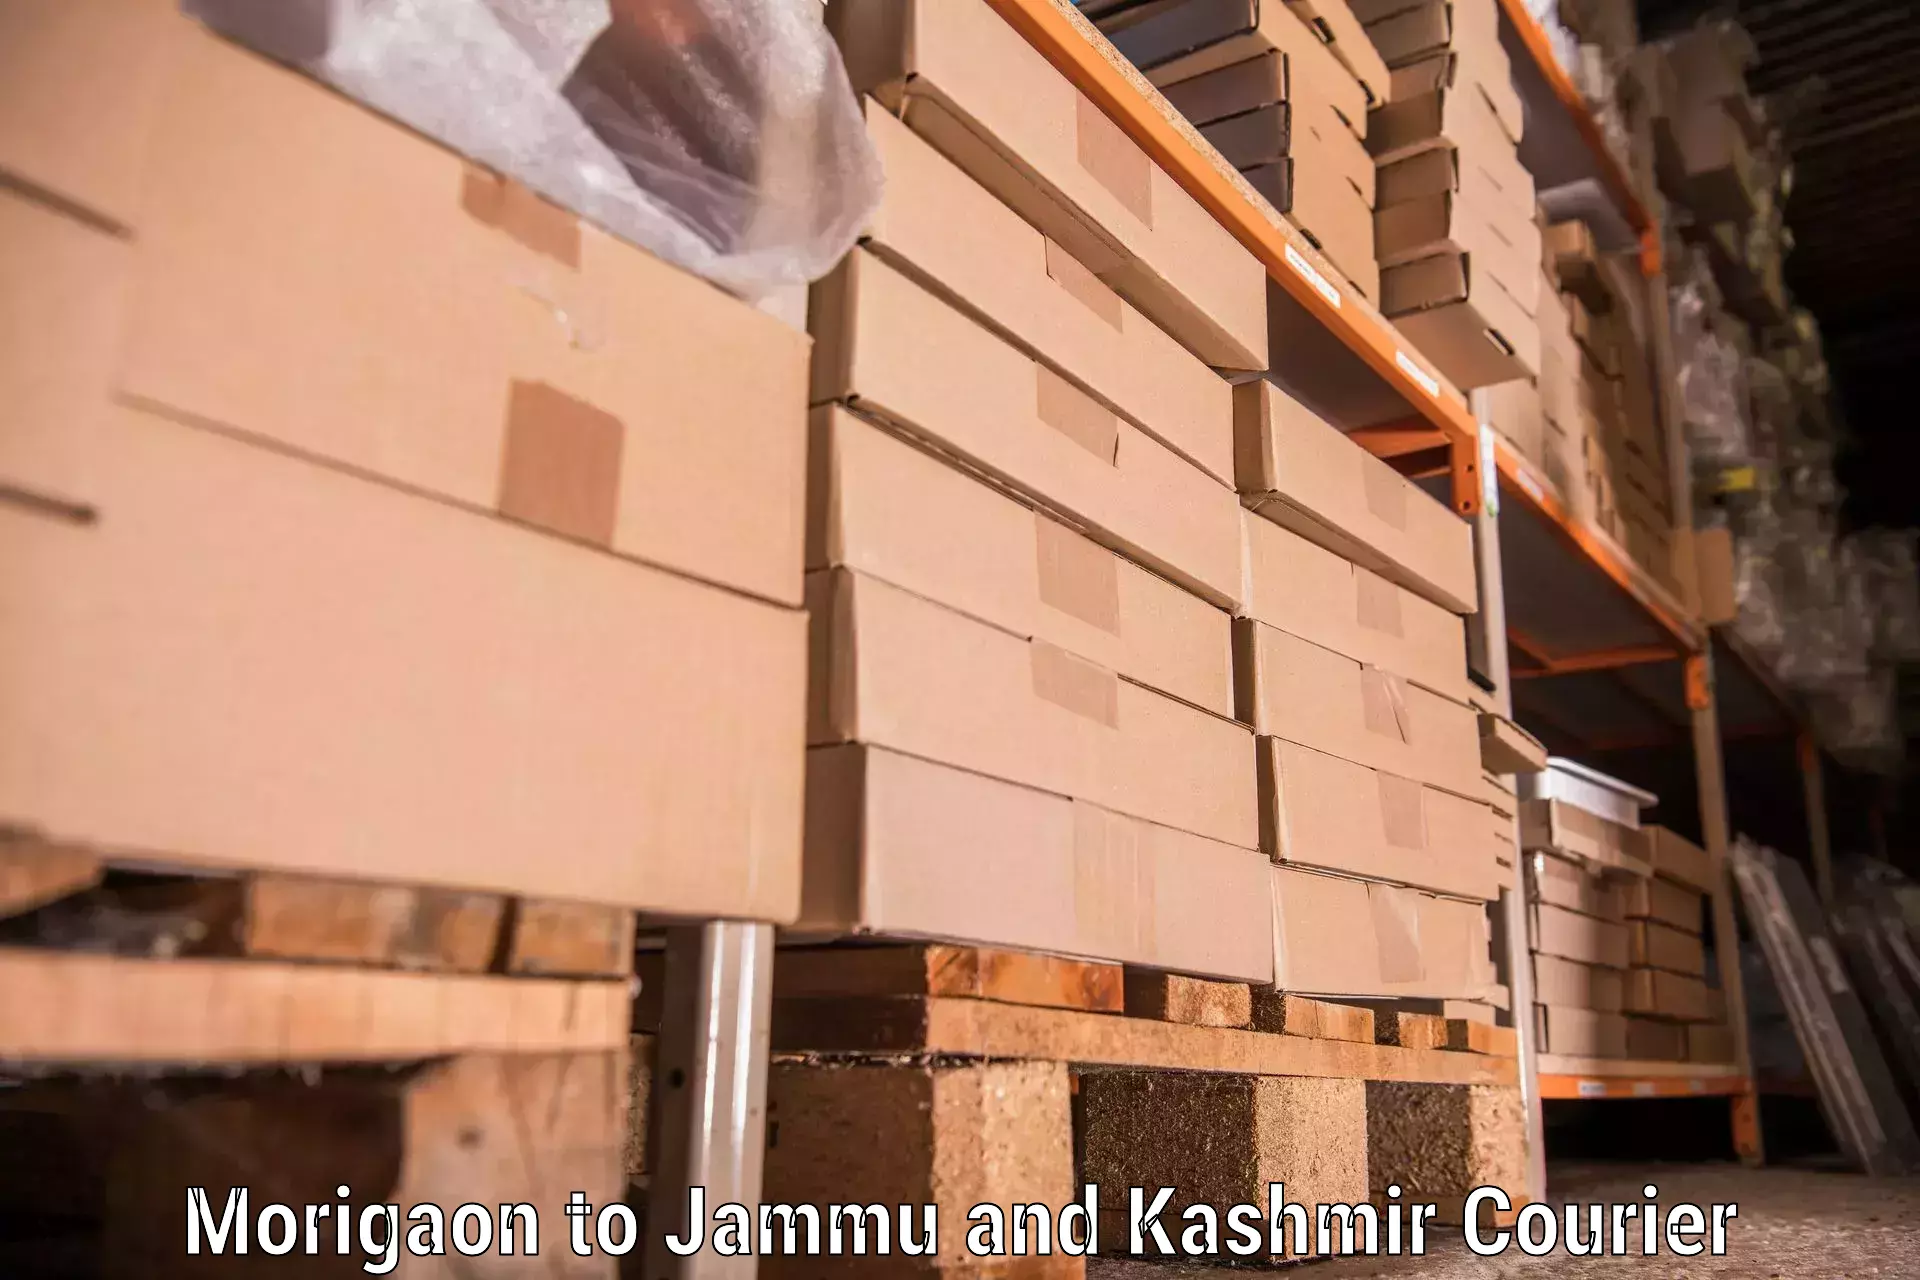 Furniture delivery service Morigaon to Shopian